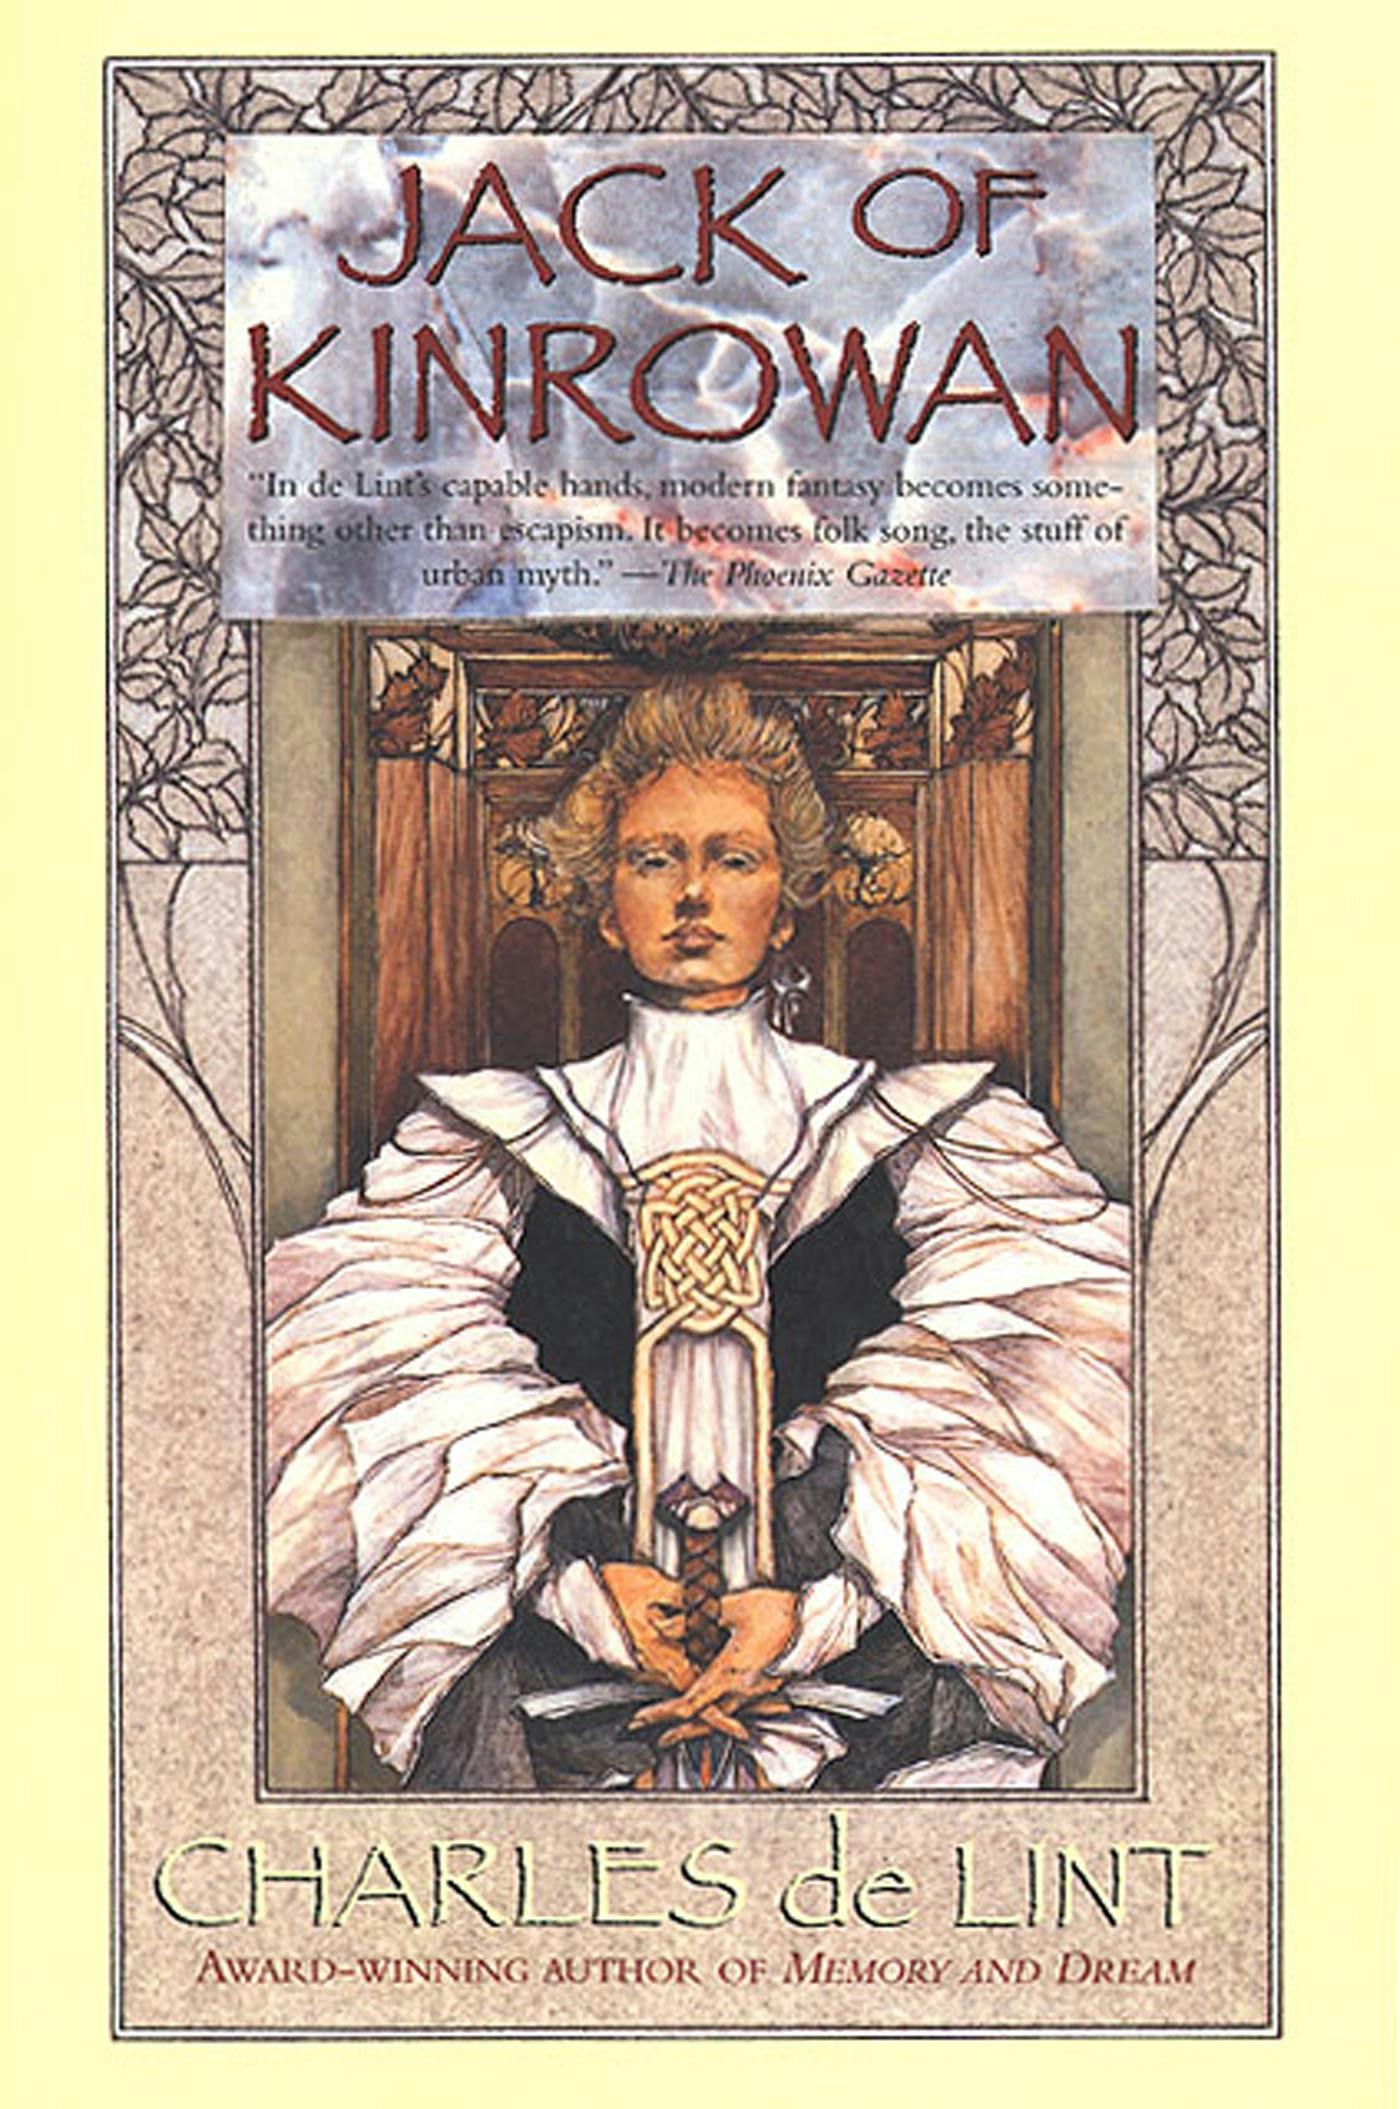 Cover for the book titled as: Jack of Kinrowan